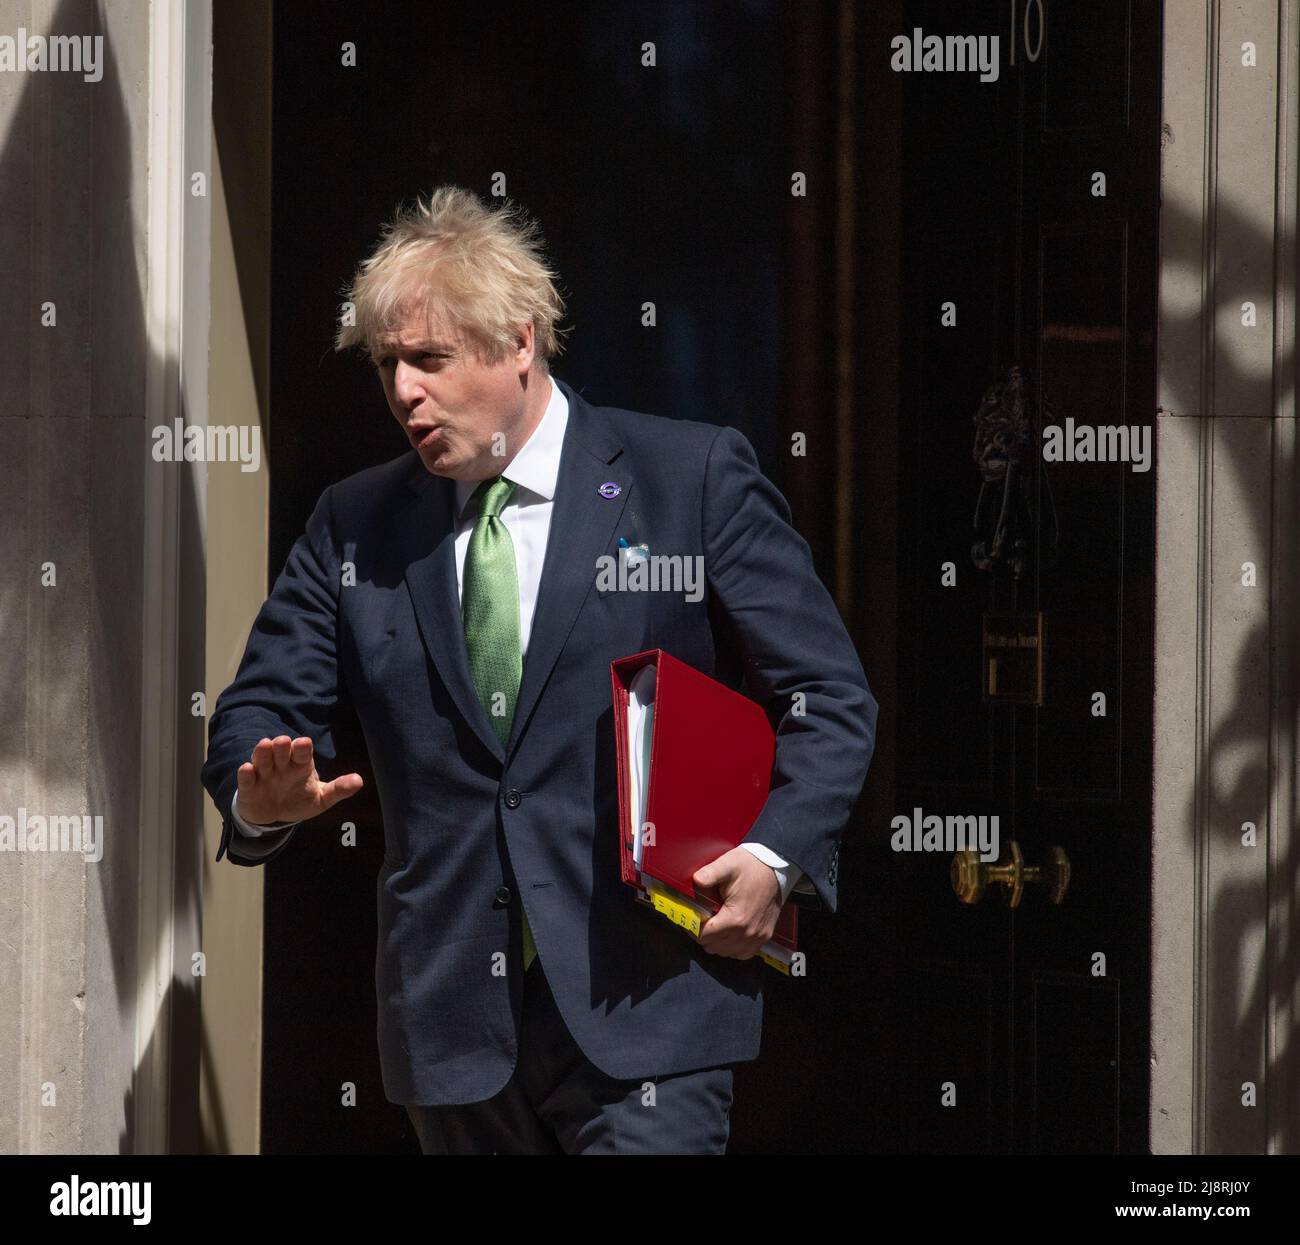 Downing Street, London,UK. 18 May 2022. Prime Minister Boris Johnson leaves No 10 to attend weekly PMQs in Parliament. Credit: Malcolm Park/Alamy Live News. Stock Photo